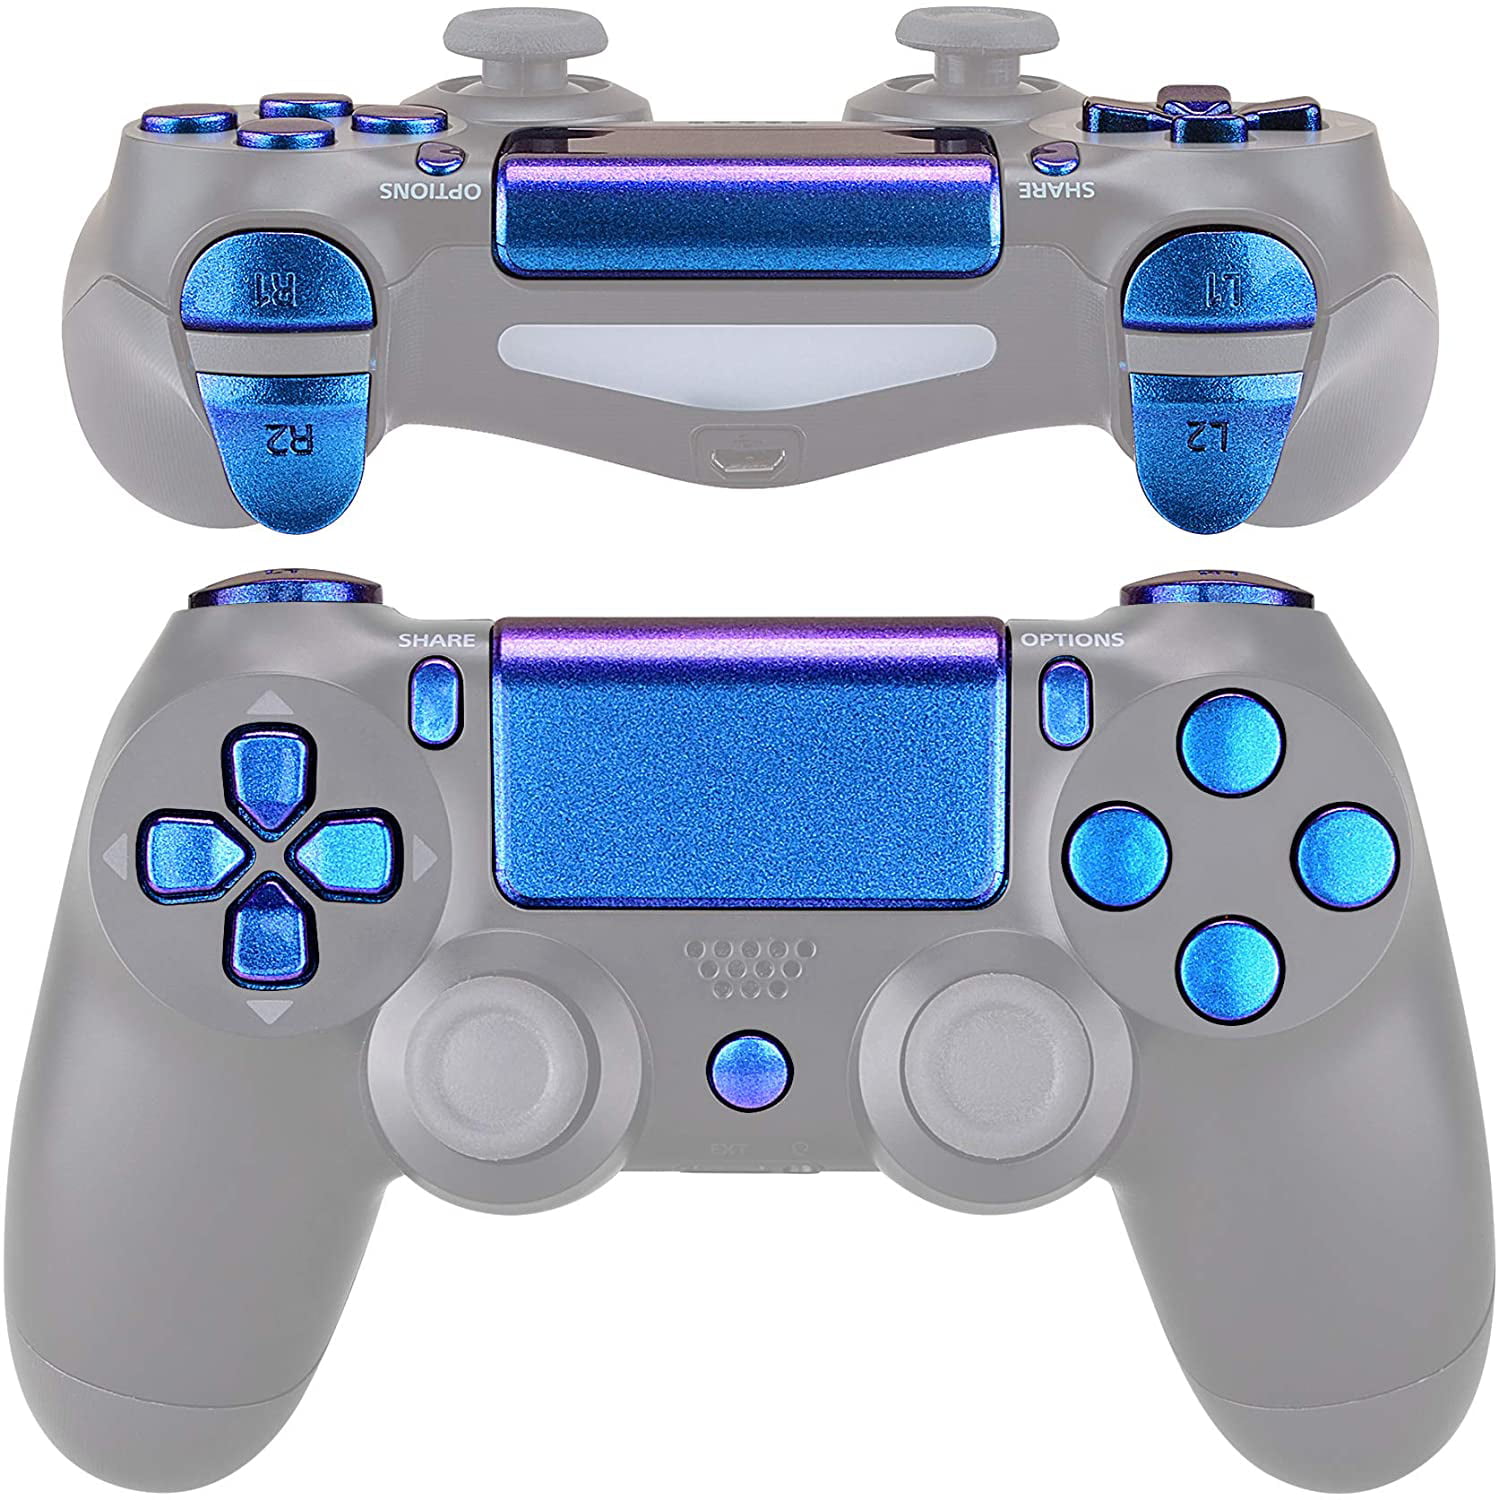 D pad R1 L1 R2 L2 Trigger Touchpad Action Home Share O ions Buttons for Playstation Controller Chameleon Purple Blue Full Set Buttons Repair Kits for PS4 Slim Pro CUH ZCT2